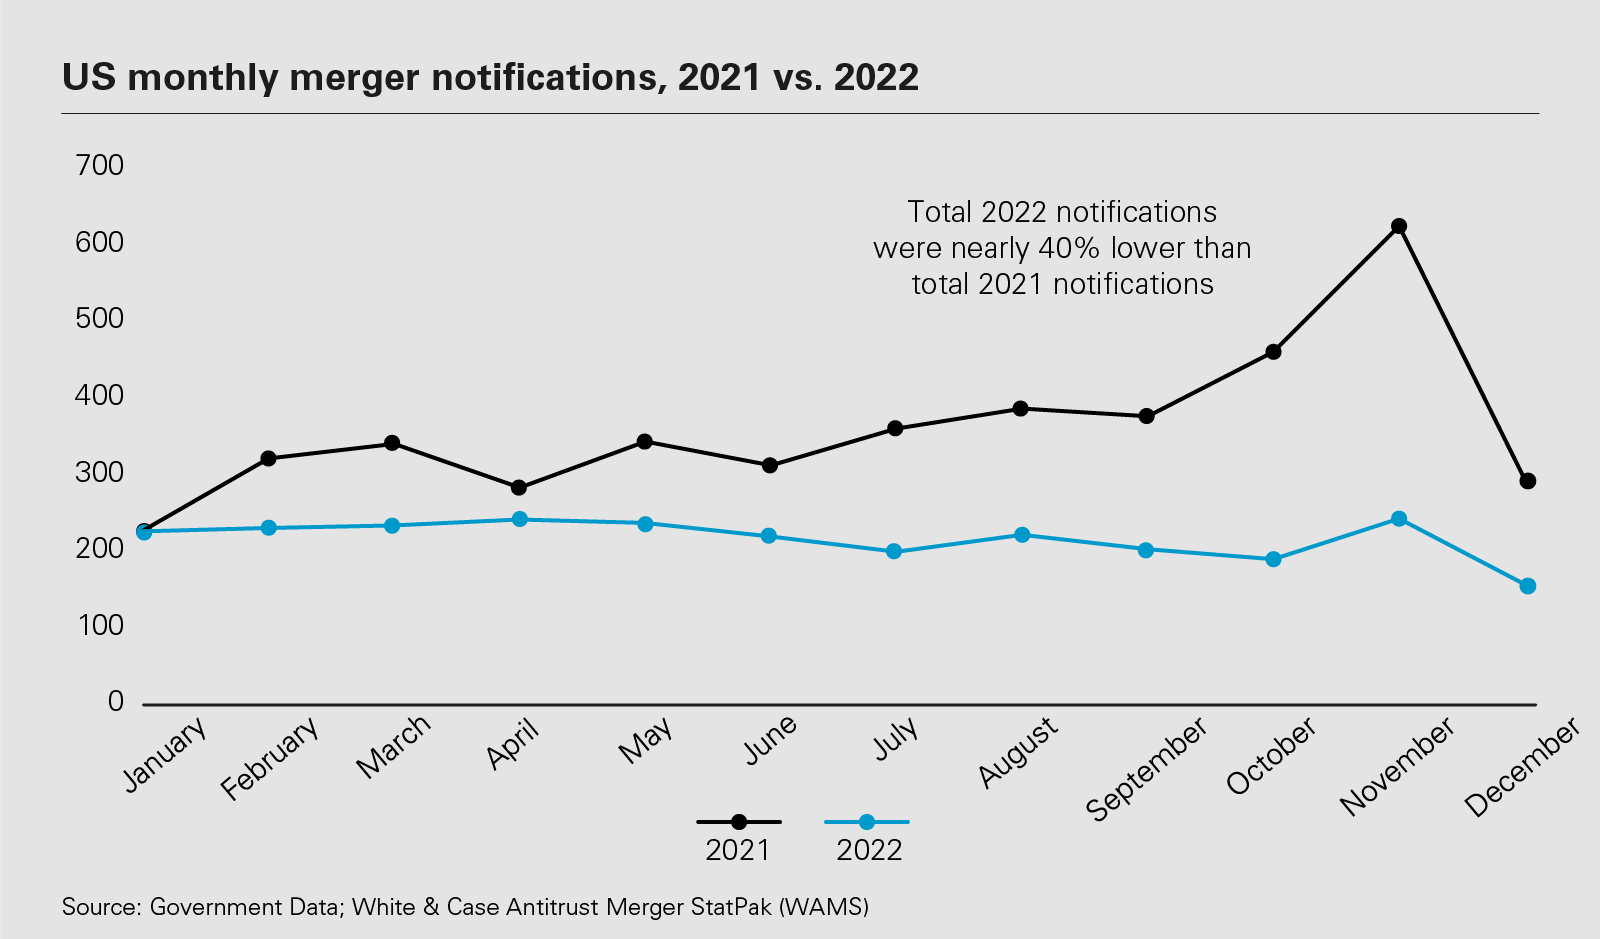 US monthly merger notifications, 2021 vs. 2022